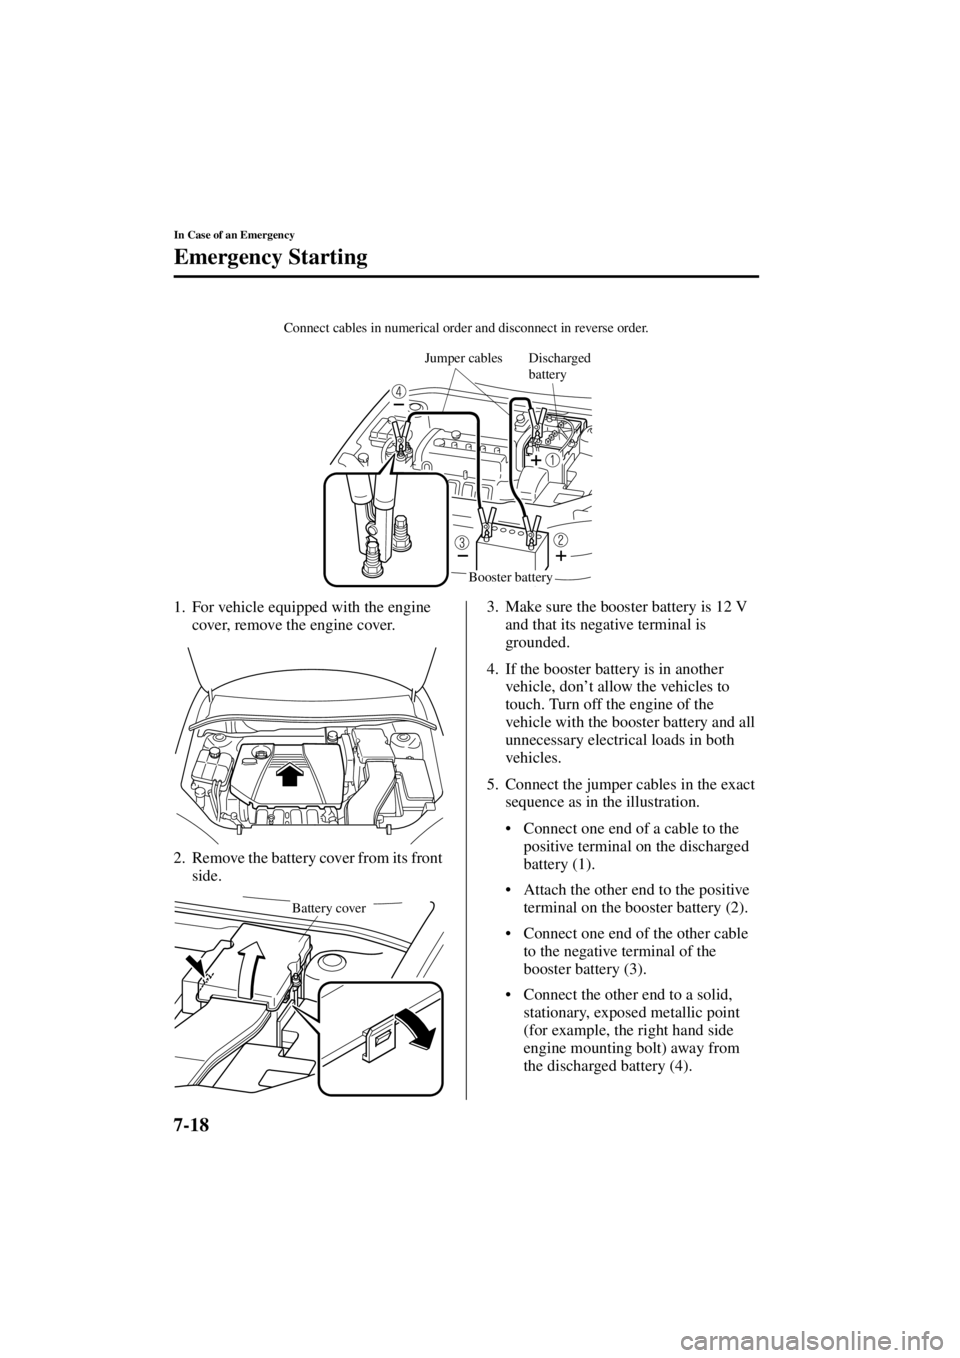 MAZDA MODEL 3 5-DOOR 2004  Owners Manual 7-18
In Case of an Emergency
Emergency Starting
Form No. 8S18-EA-03I
1. For vehicle equipped with the engine cover, remove the engine cover.
2. Remove the battery cover from its front  side. 3. Make s